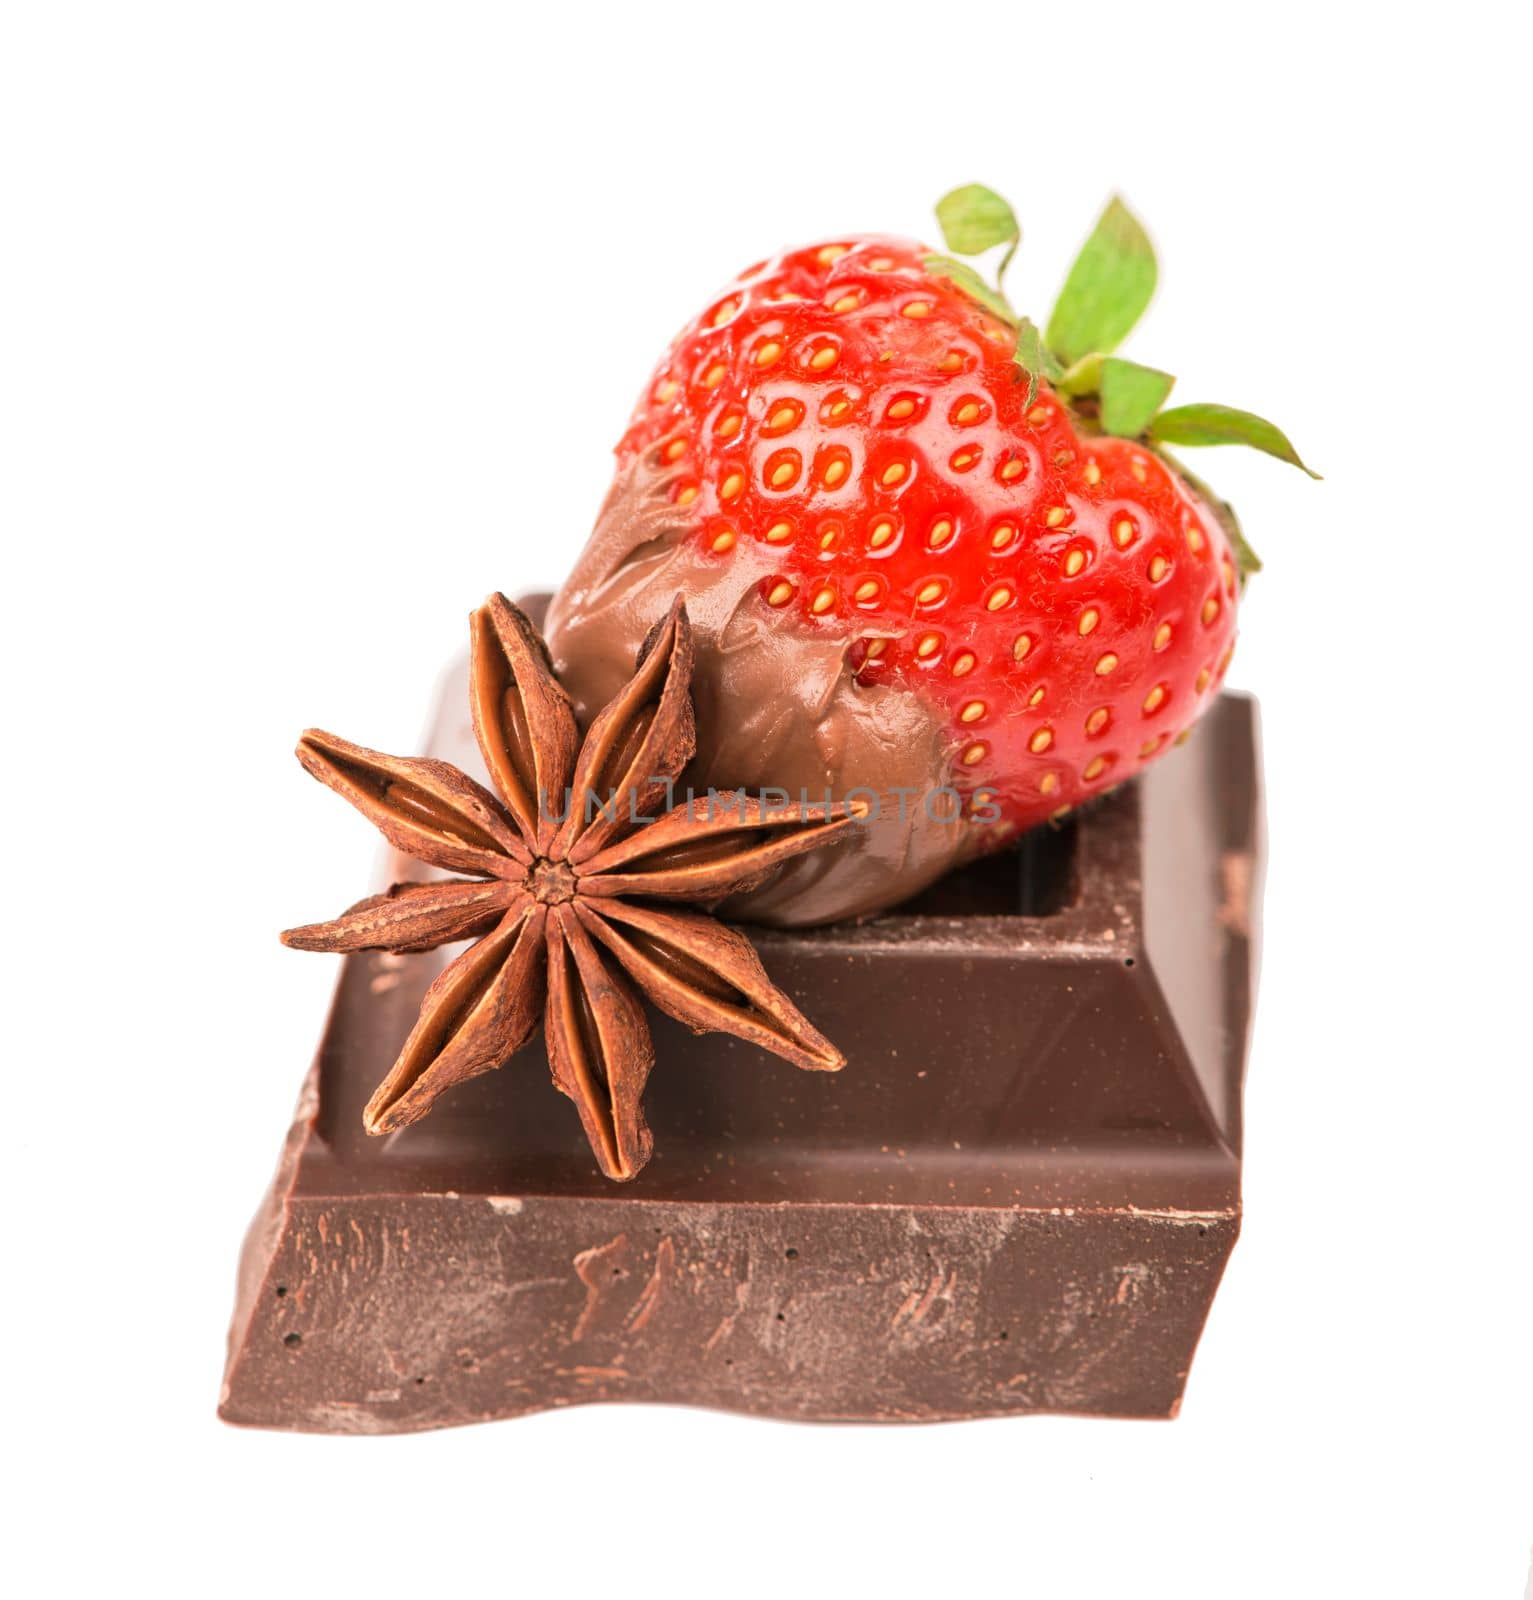 chocolate bars with its ingredients and strawberry by aprilphoto